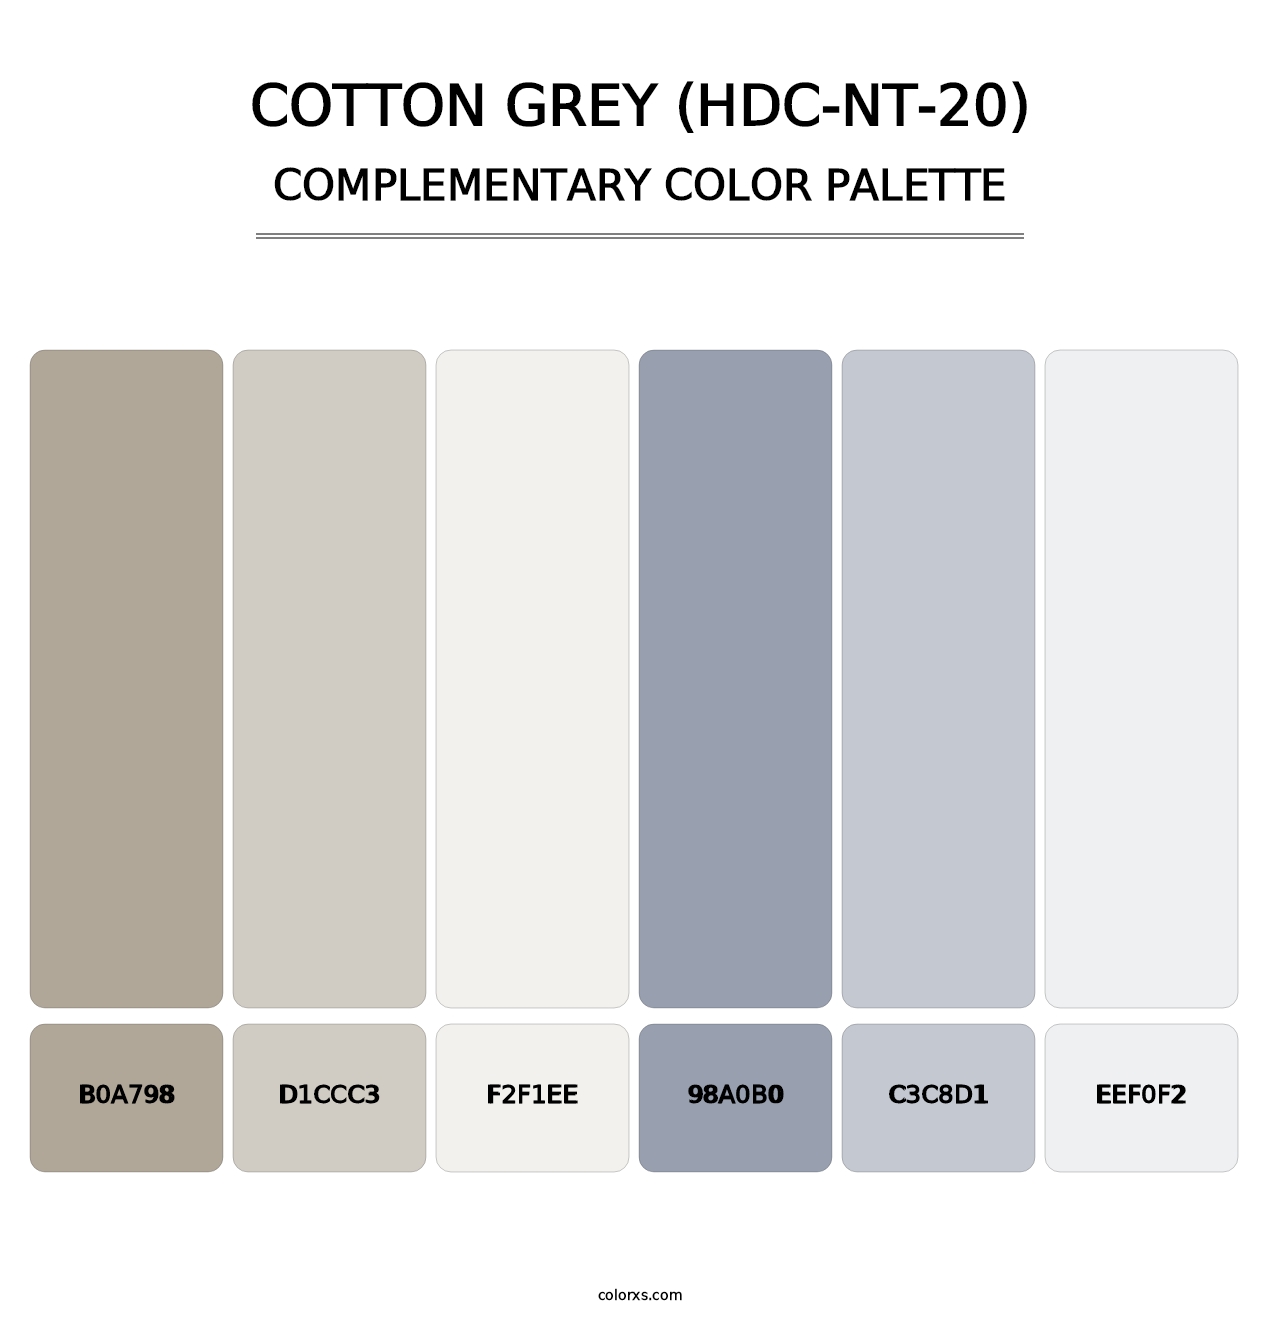 Cotton Grey (HDC-NT-20) - Complementary Color Palette